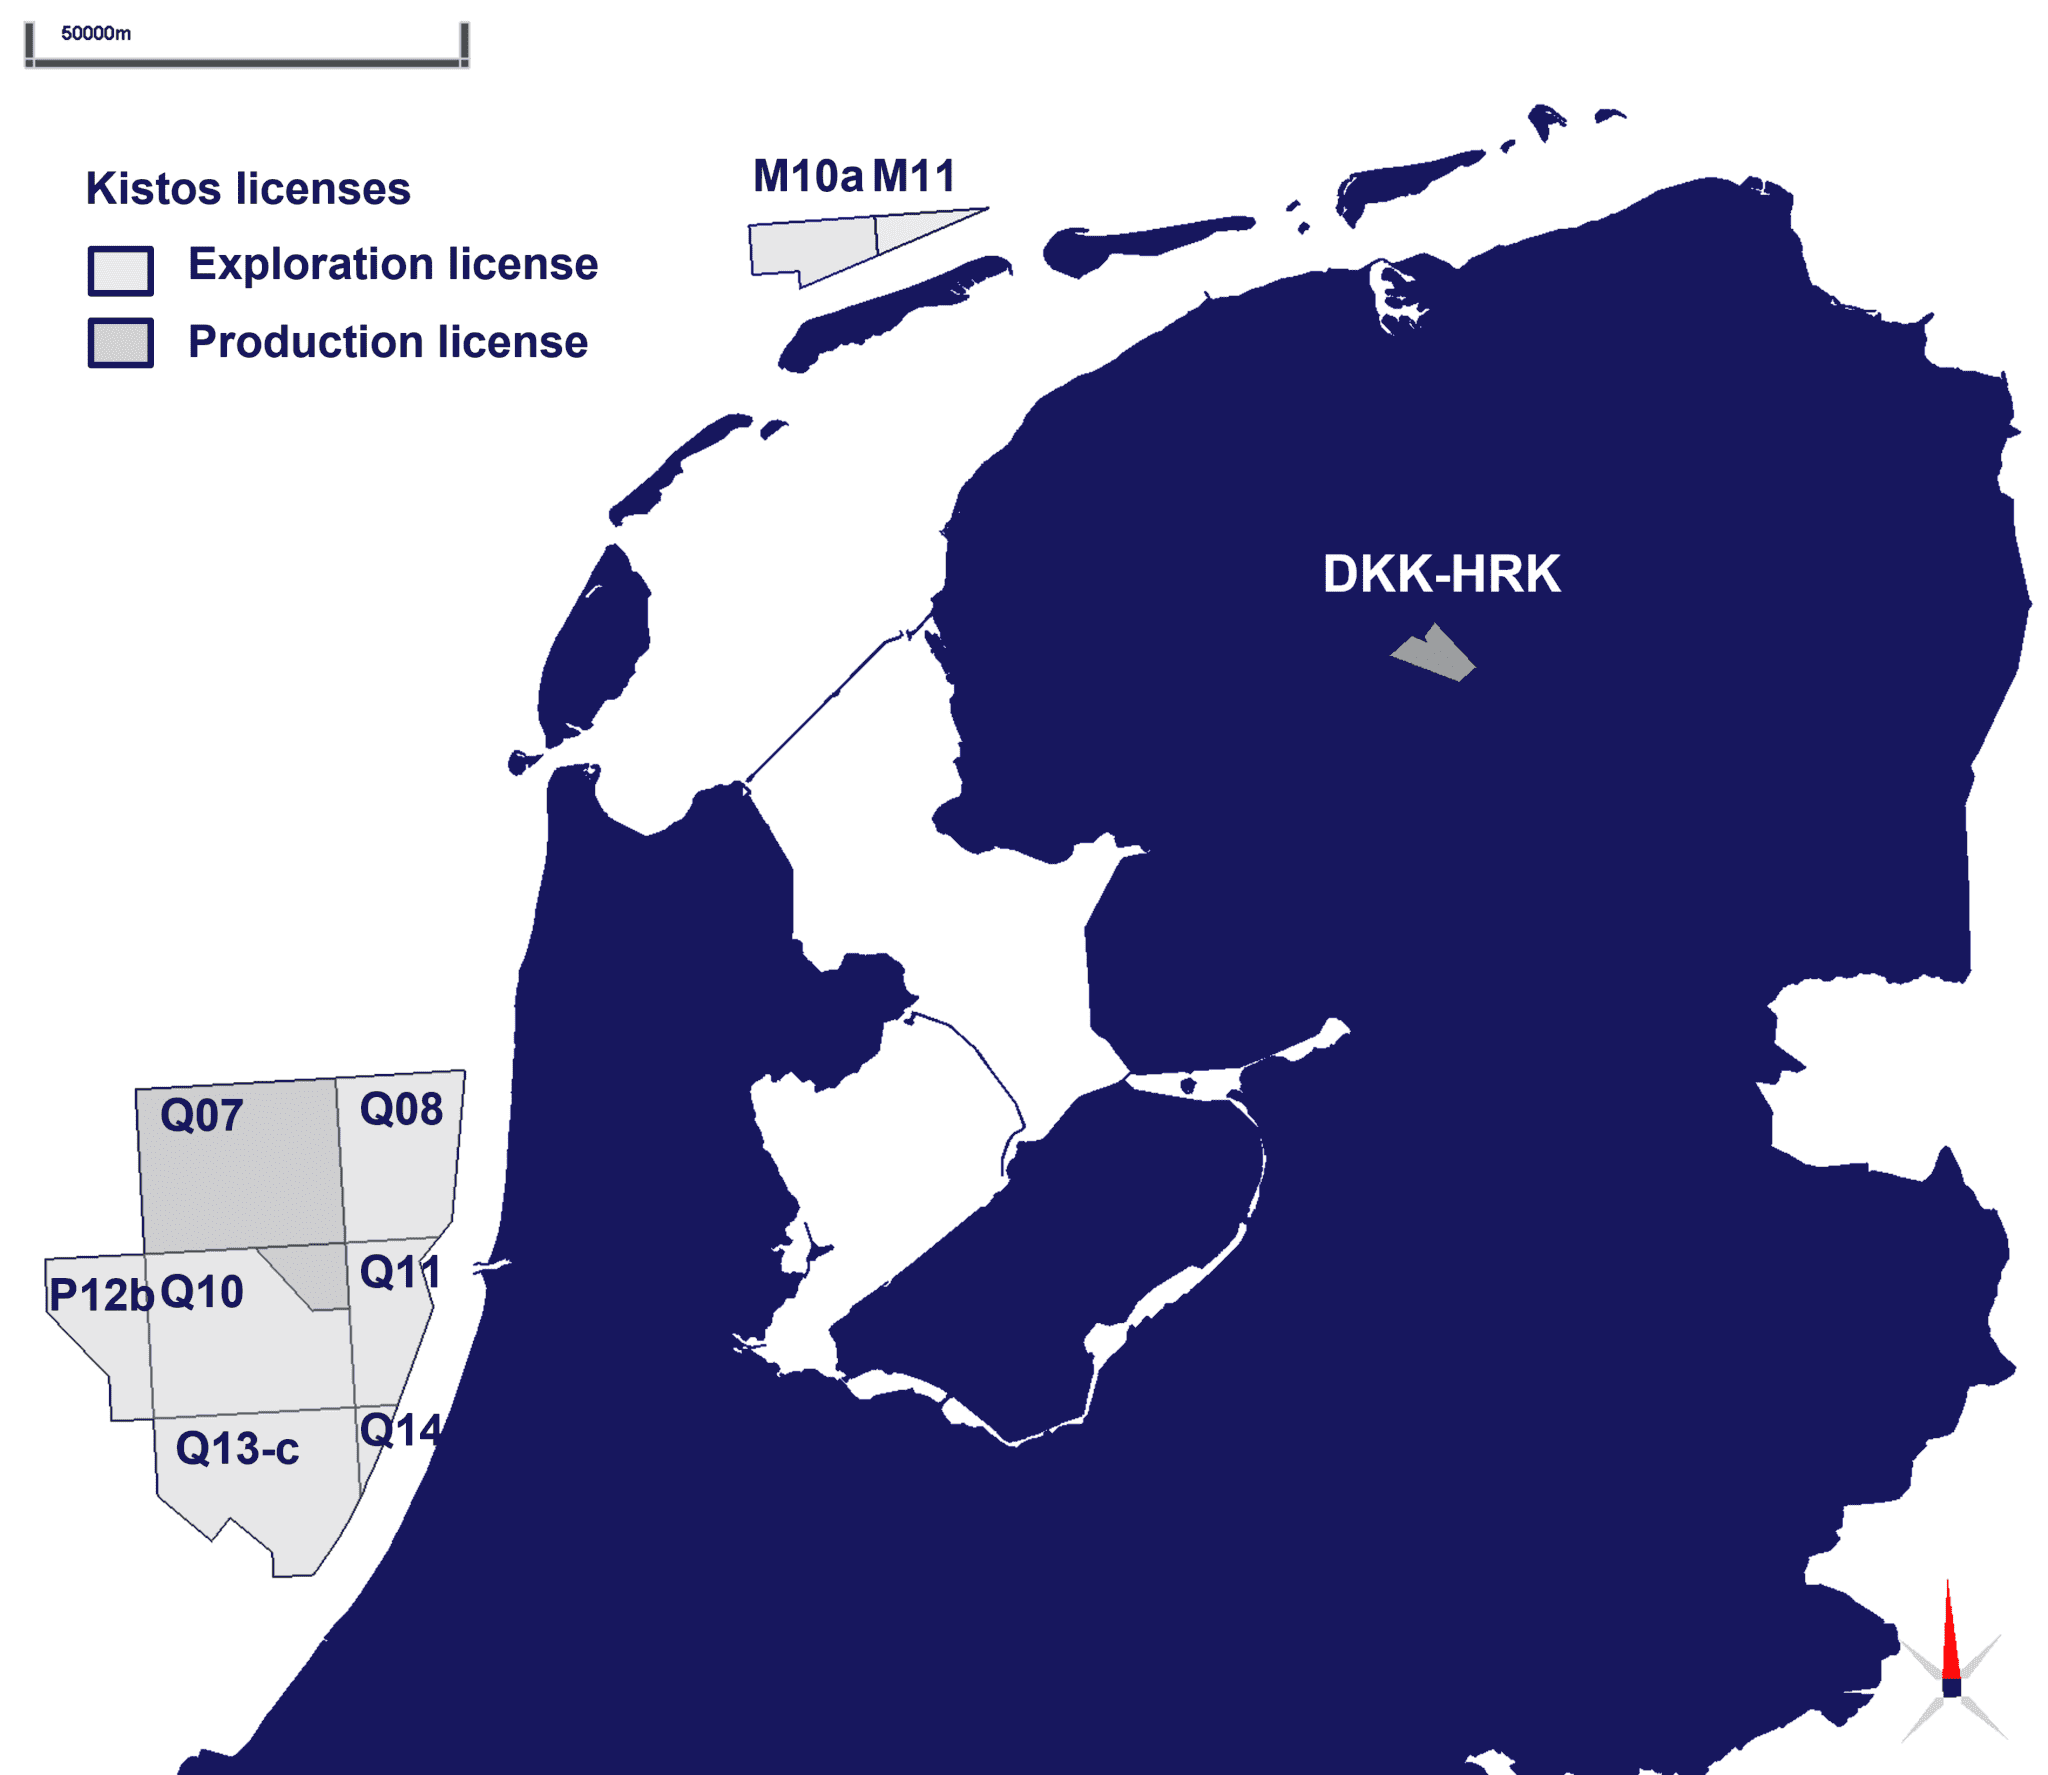 Kistos' exploration and production licenses in the Netherlands; Source: Kistos